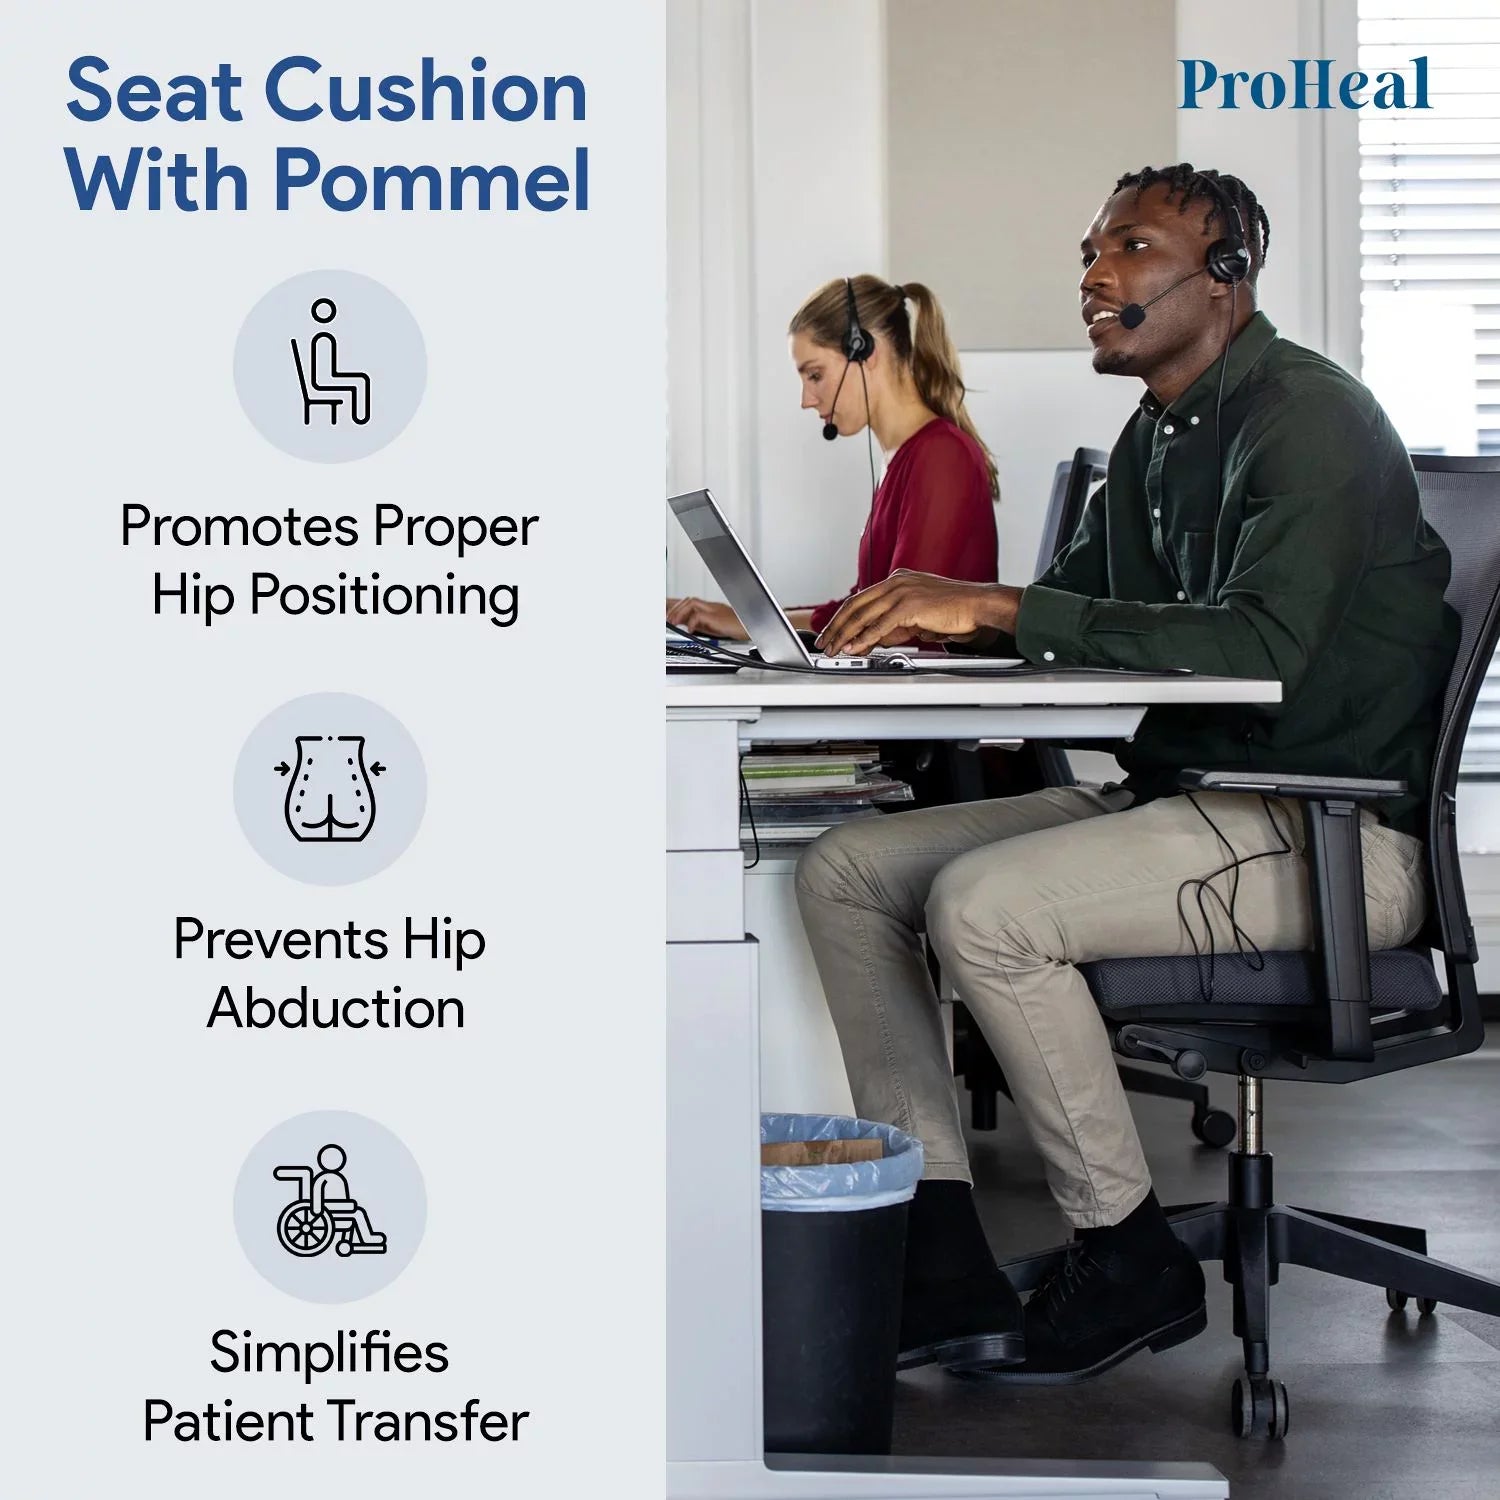 Wheelchair Seat Pad Cushion for Patients Removable Pommel Lightweight